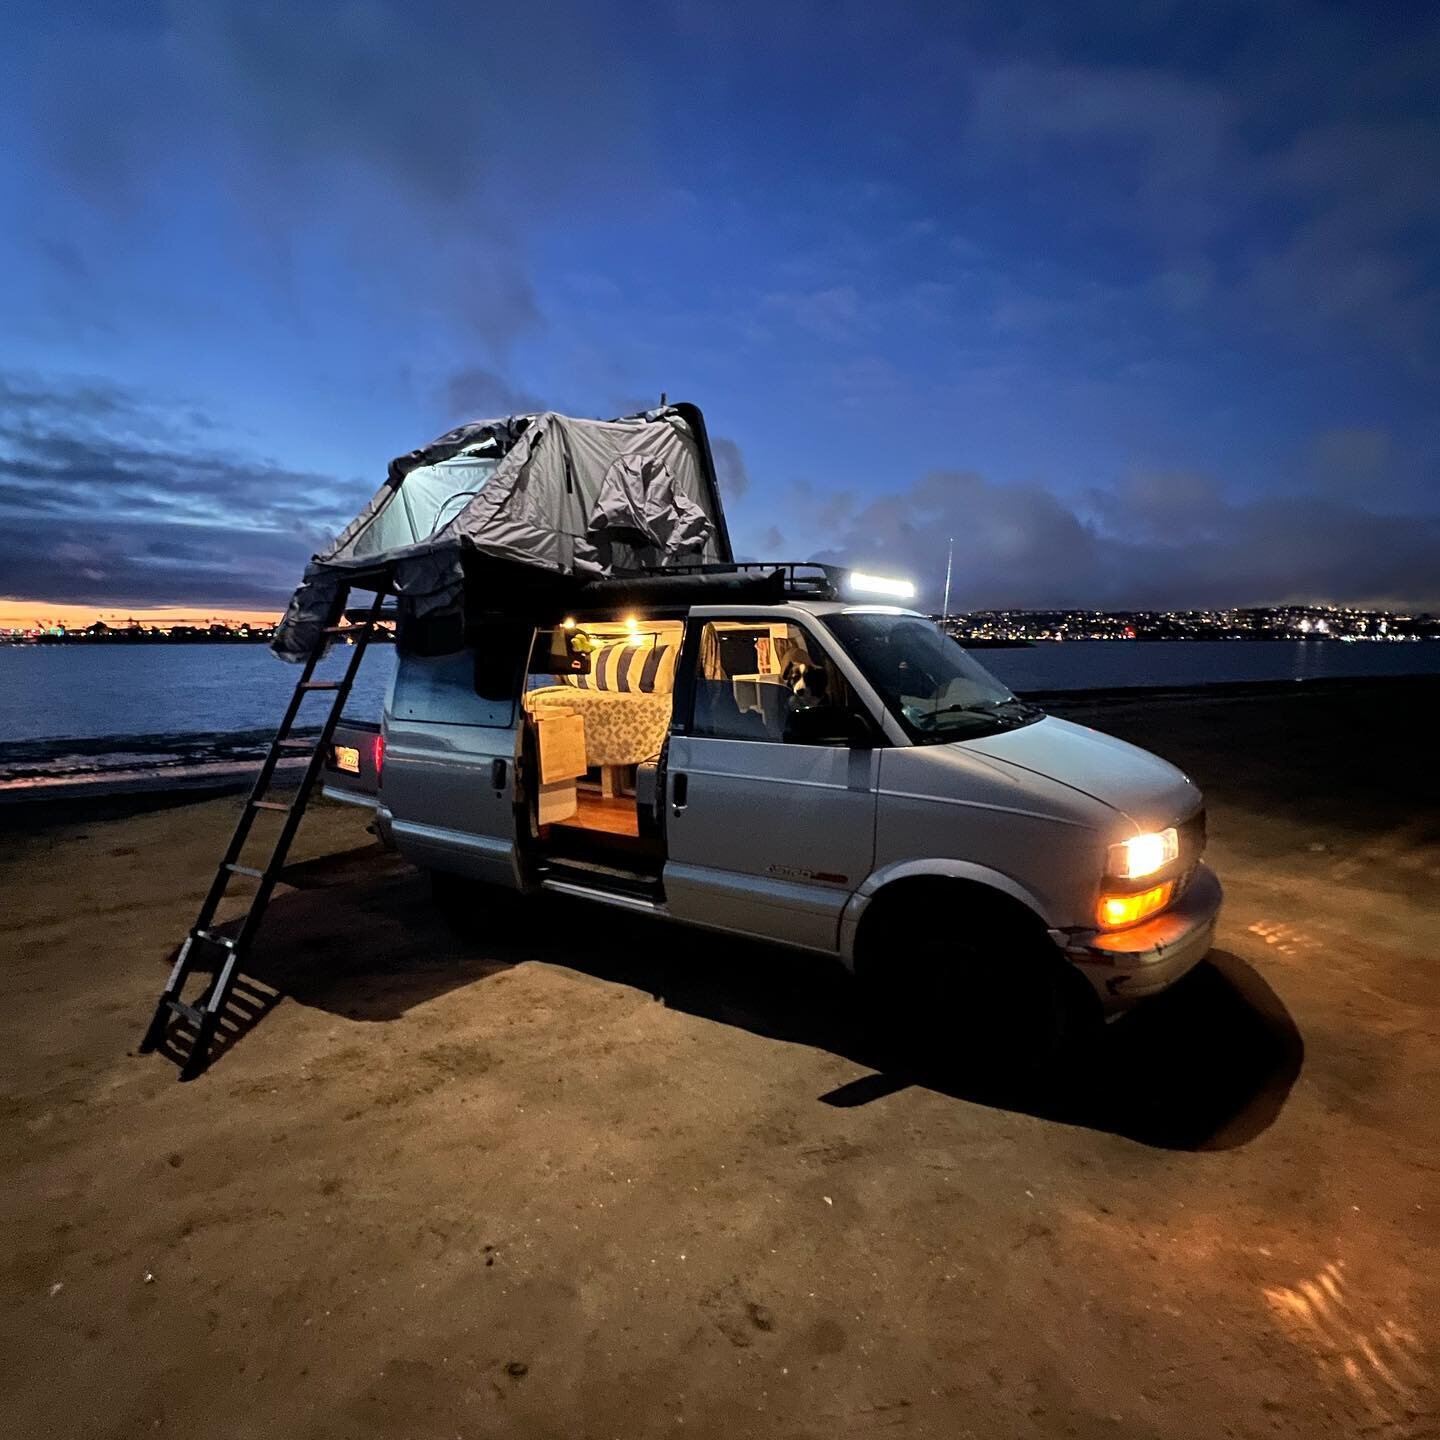 Astro build #2: We love these Vans and especially the AWD models! 🚐💨 Rent this today out of San Diego on @outdoorsy @simpleconversions @m.i.a.tents @thewaterport #astrovan #astro #chevy #campervan #camper #getoutside #roadtrip #overlander #explore 